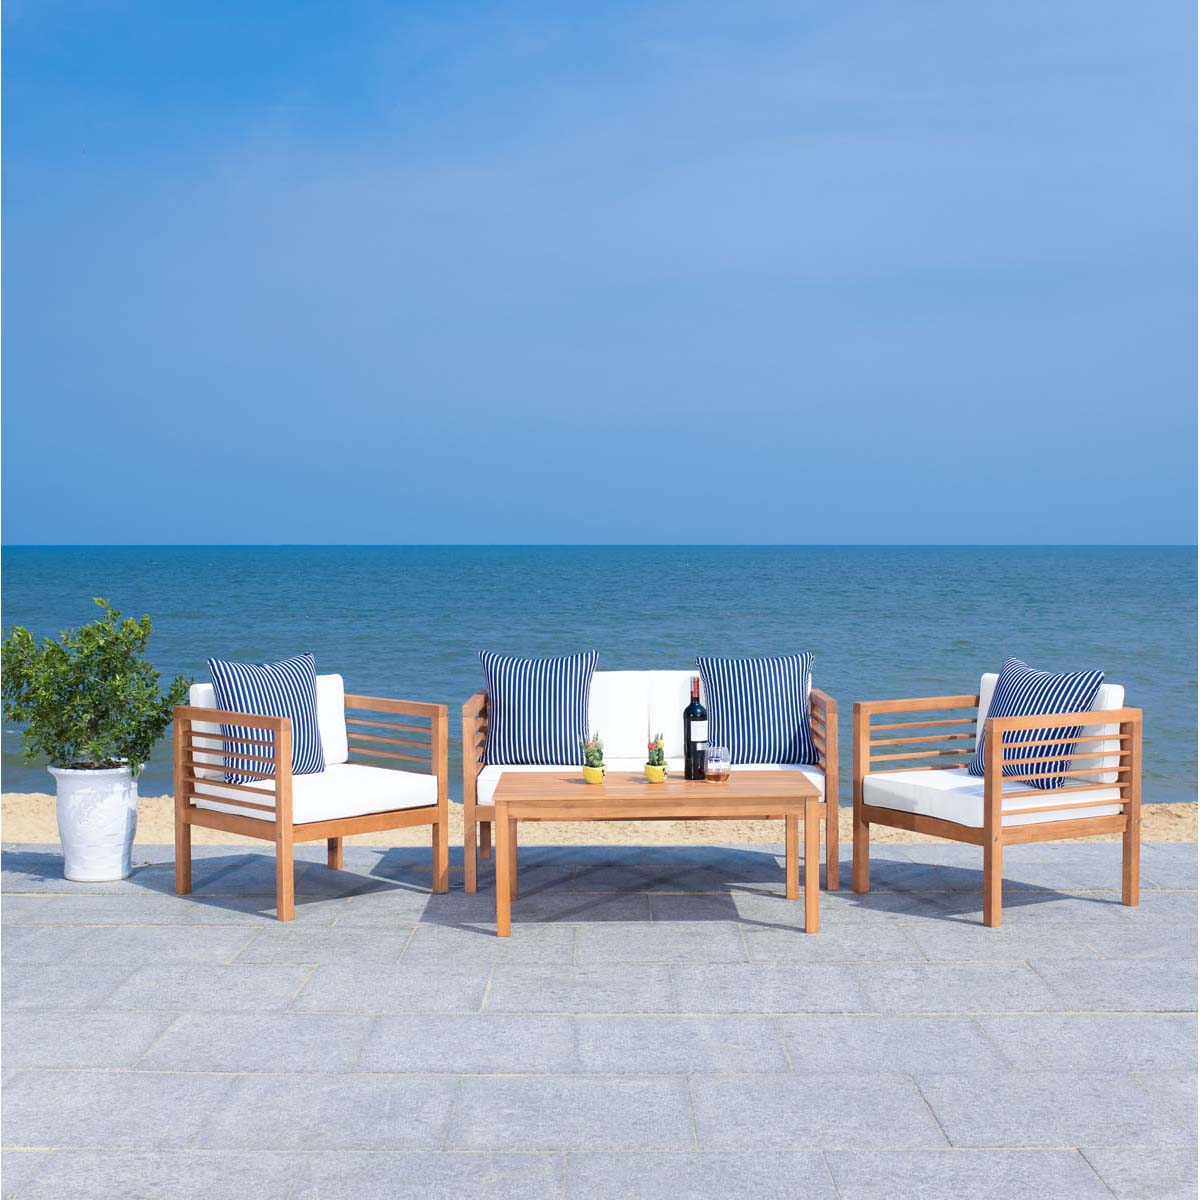 Safavieh Alda 4 Pc Outdoor Set With Accent Pillows , PAT7033 - Natural/Beige/Nvywht